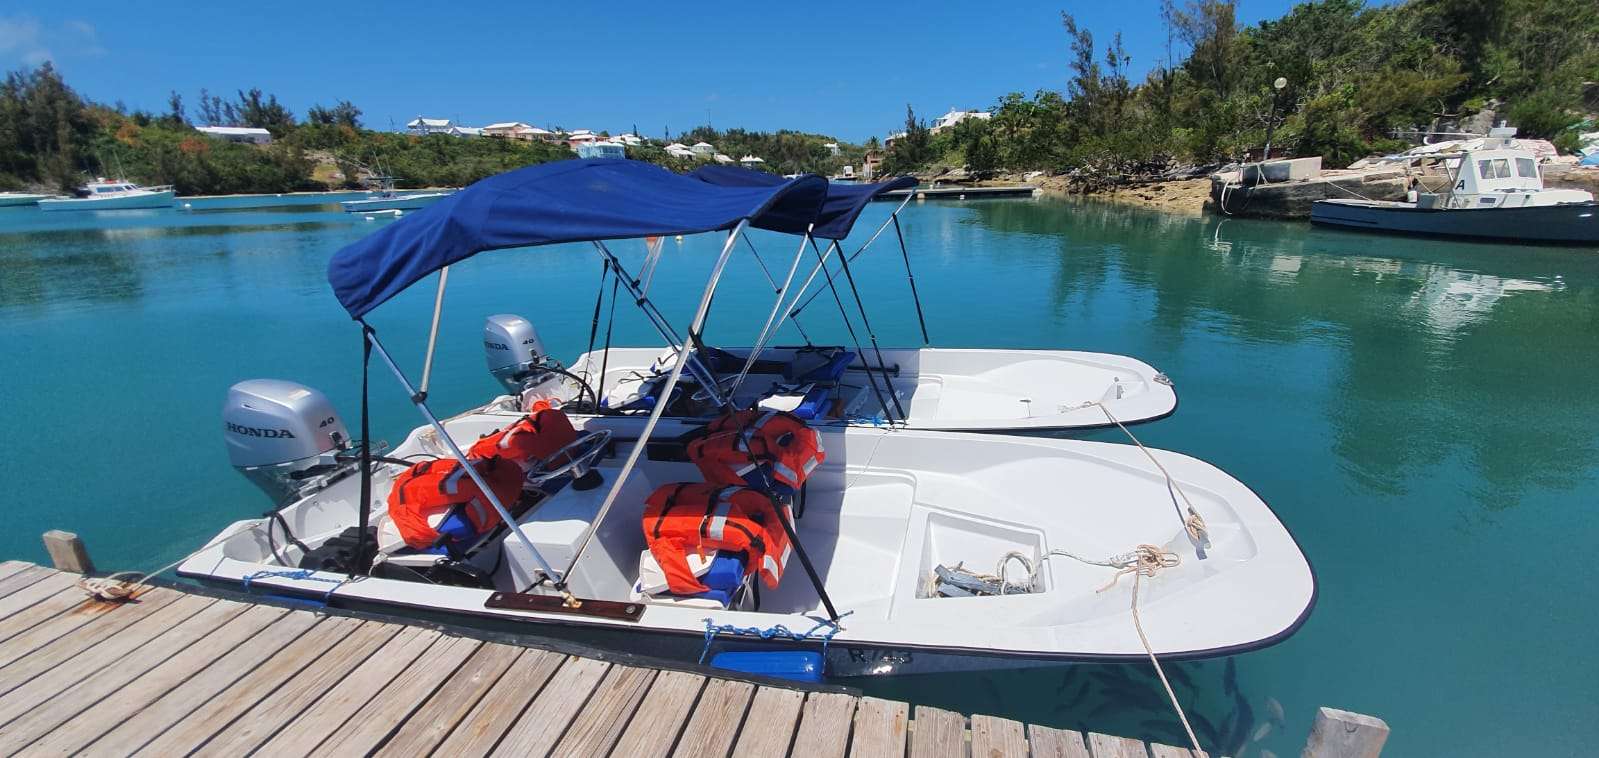 Gallery of Boat Rentals in Bermuda <p>Boston Whaler Boats in Action</p>